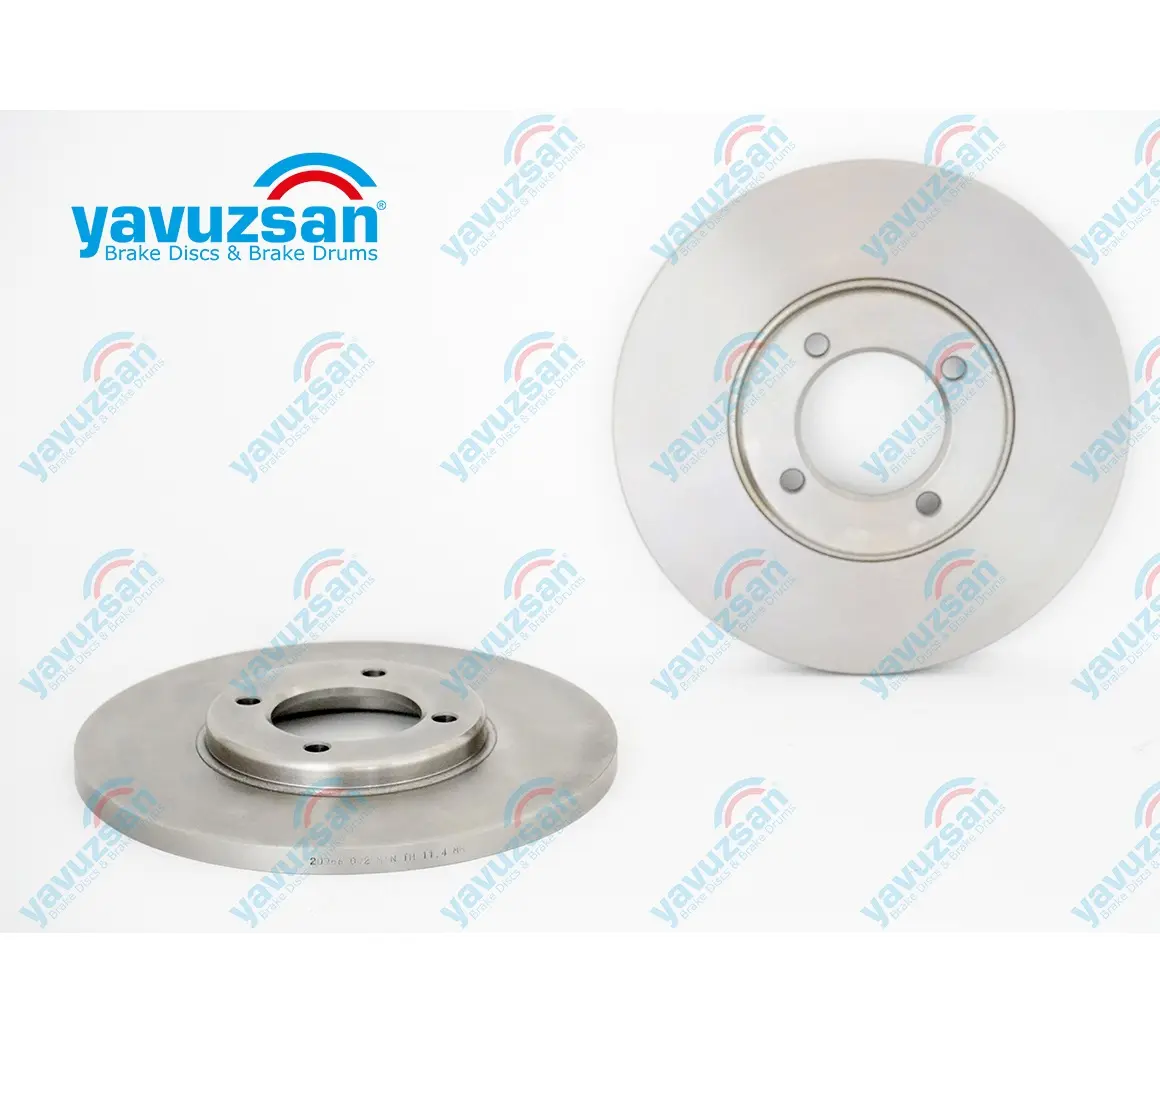 YVZコード-13002/プレミアム品質の軽商用車/乗用車BRAKE DISC from OEM/OES Supplier for FORD、HYUNDAI